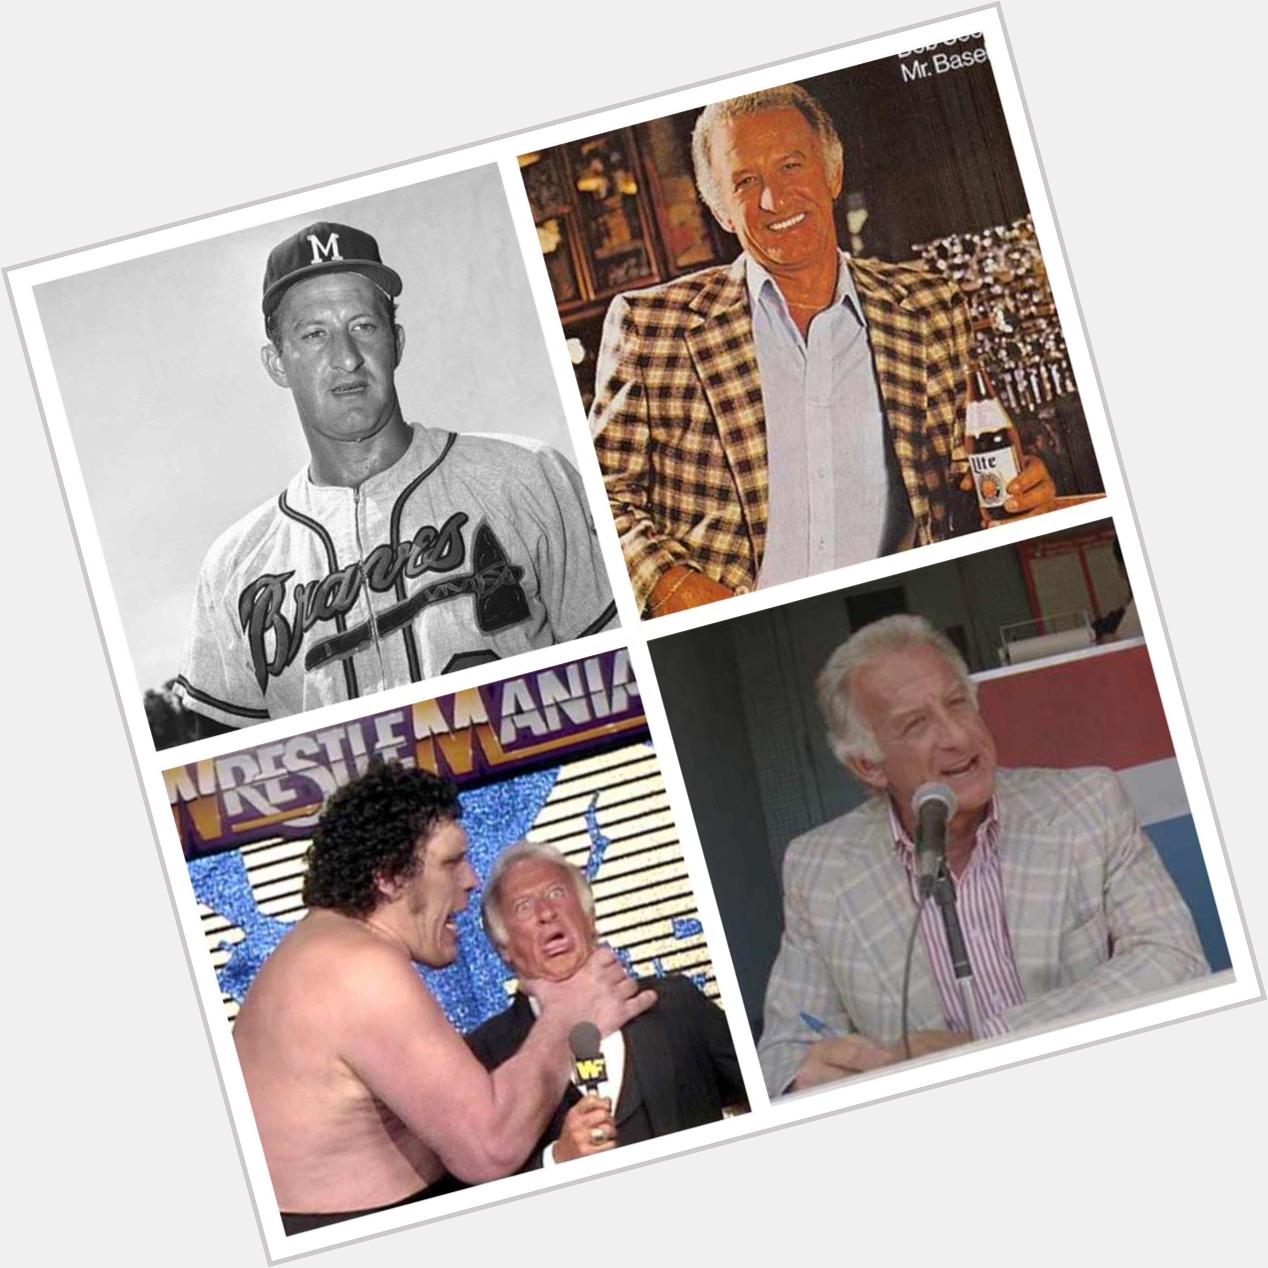 Happy Birthday to one of the best personalities in sports, Bob Uecker. Every team should be jealous of the 